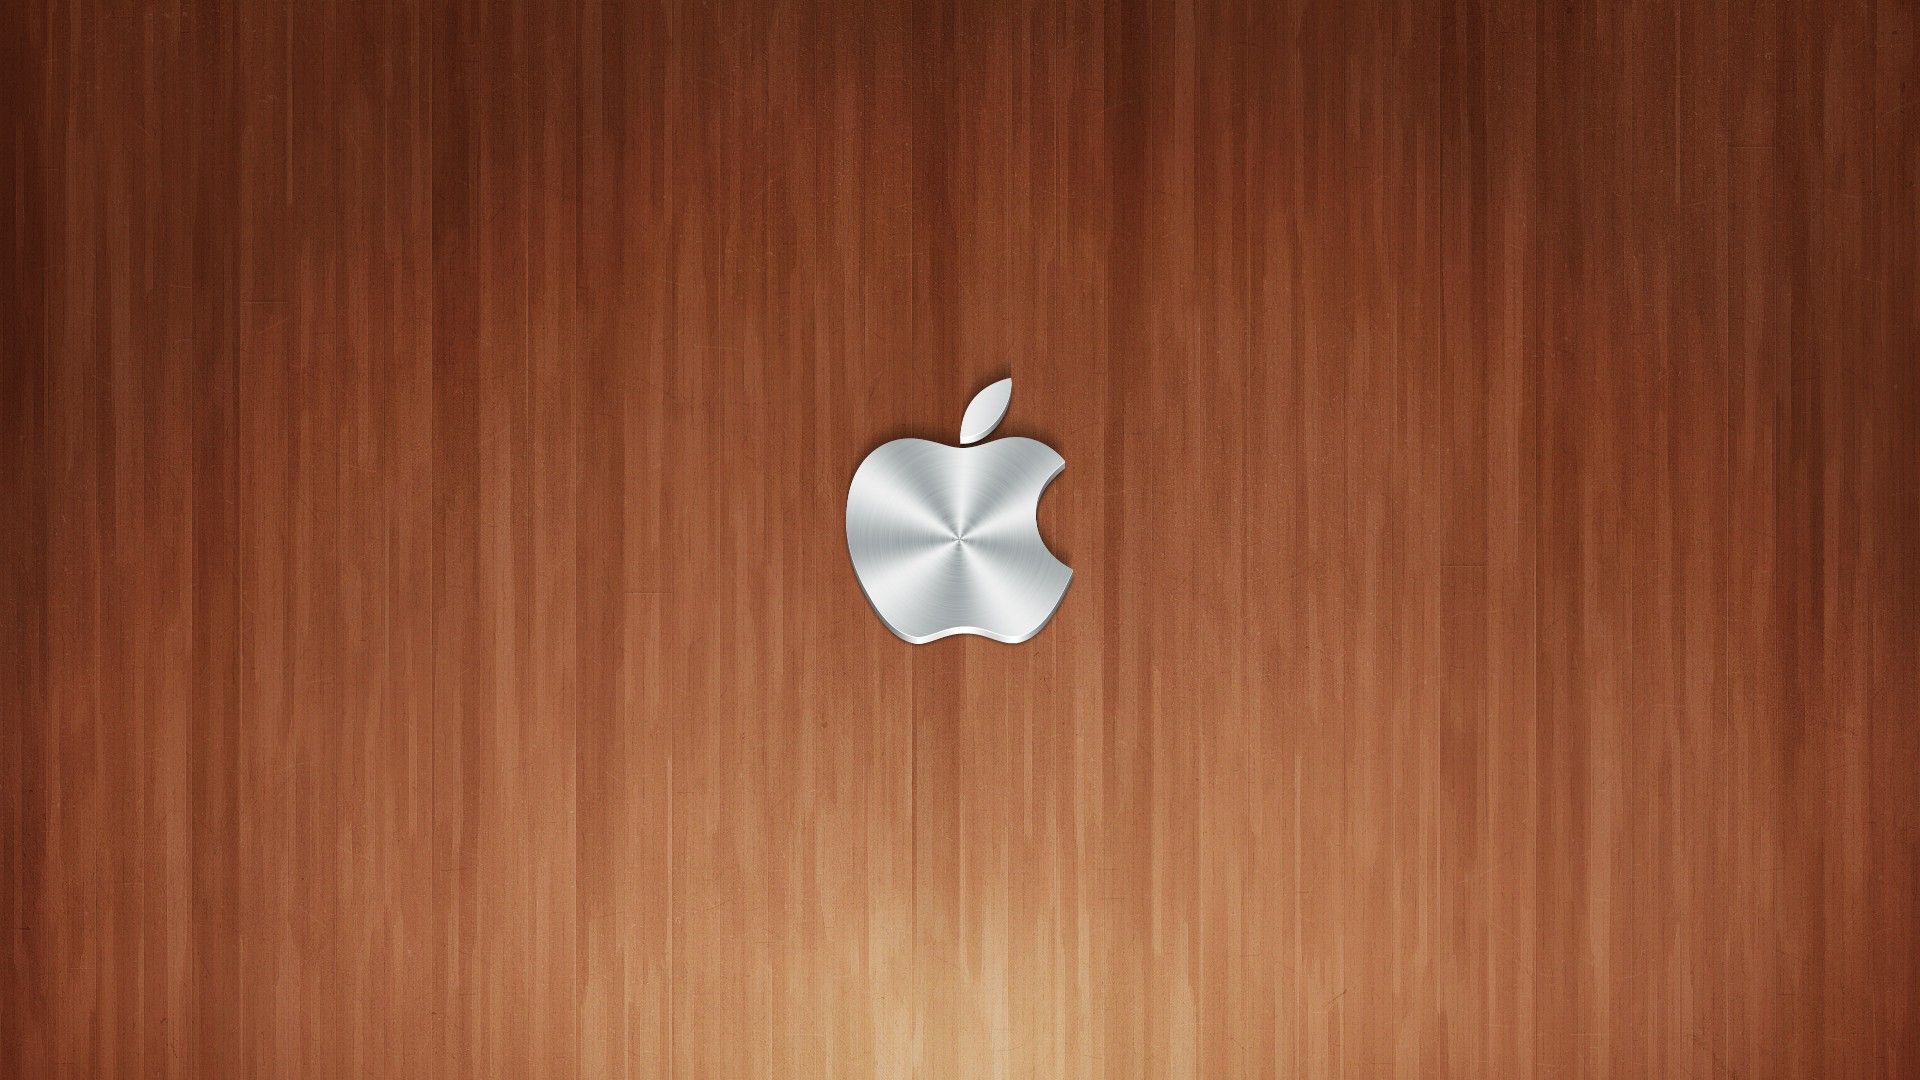 apple inc logos best widescreen background awesome #b84F